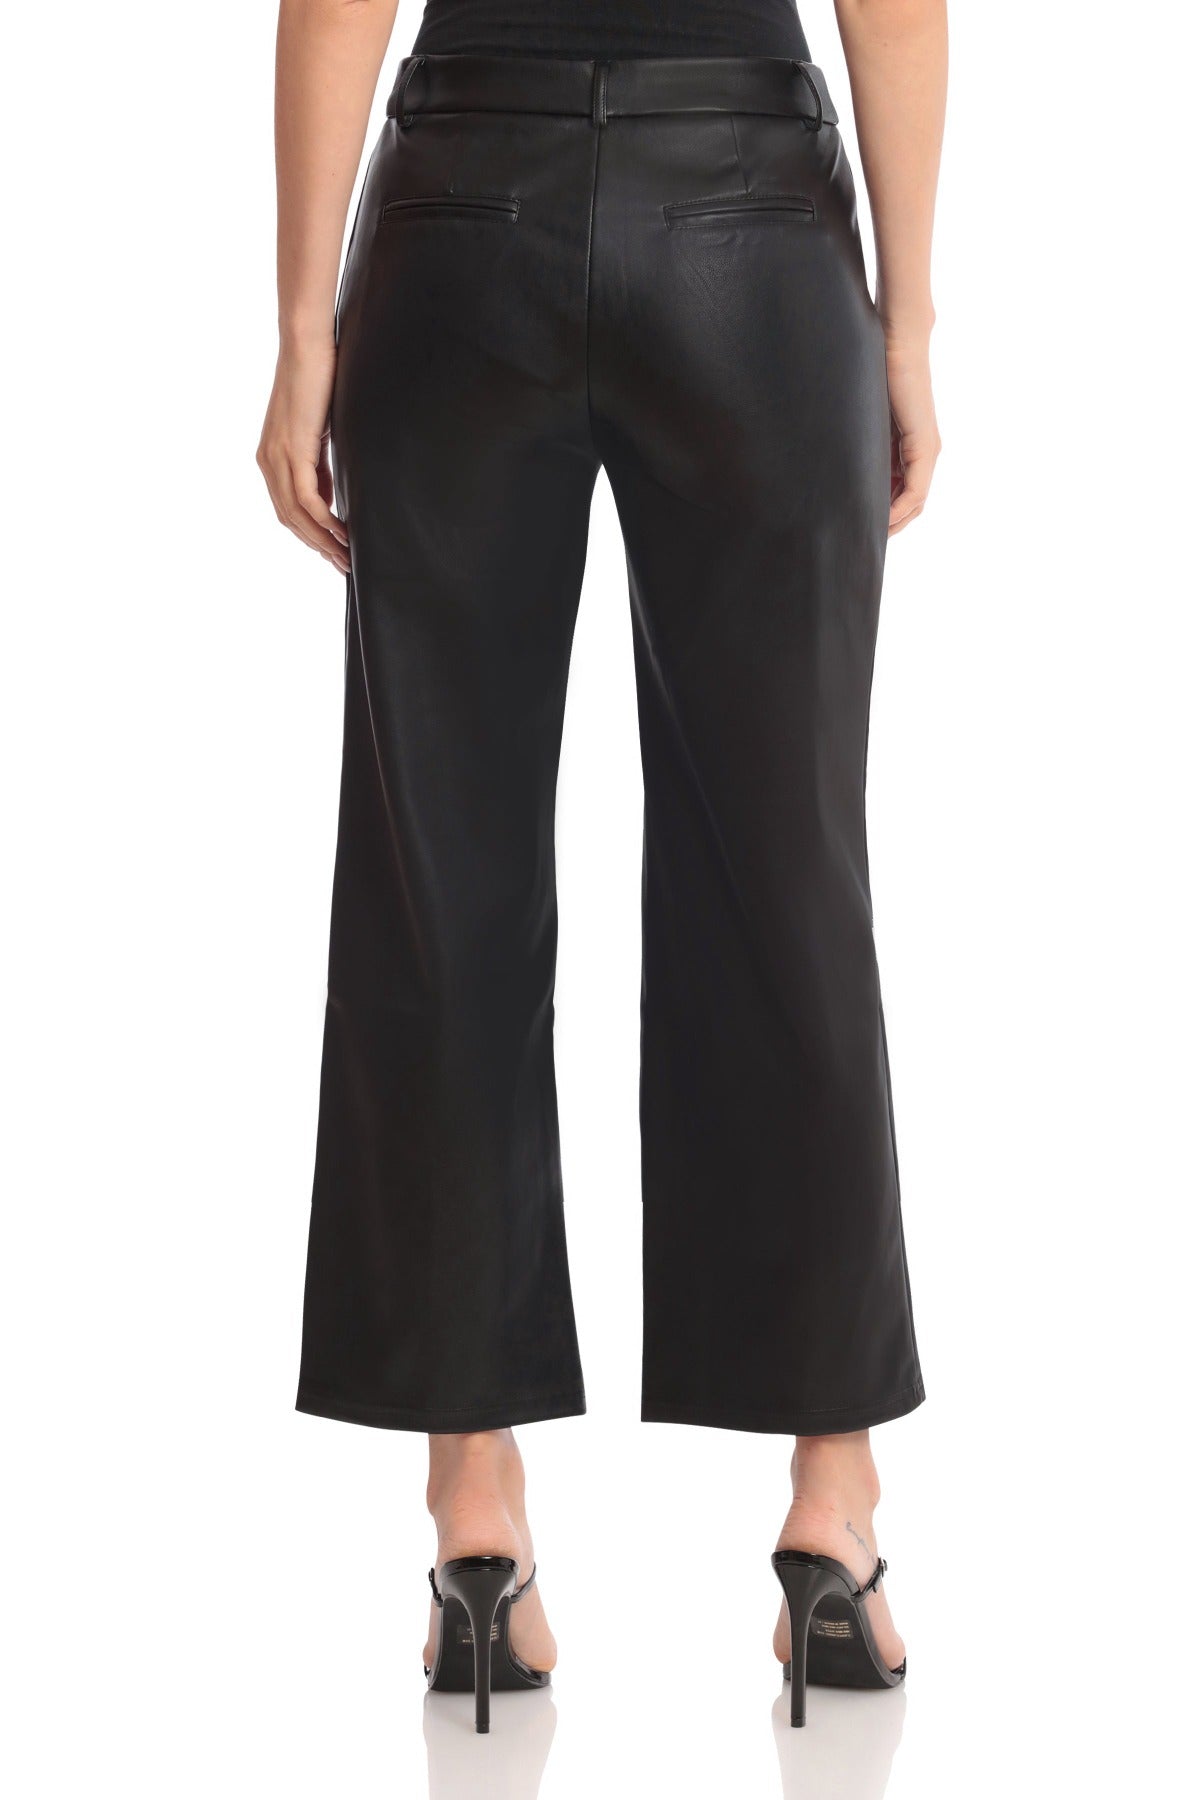 Faux Leather Seam-Front Straight Leg Trouser Pants Black - Figure Flattering Day to Night Bottoms for Women